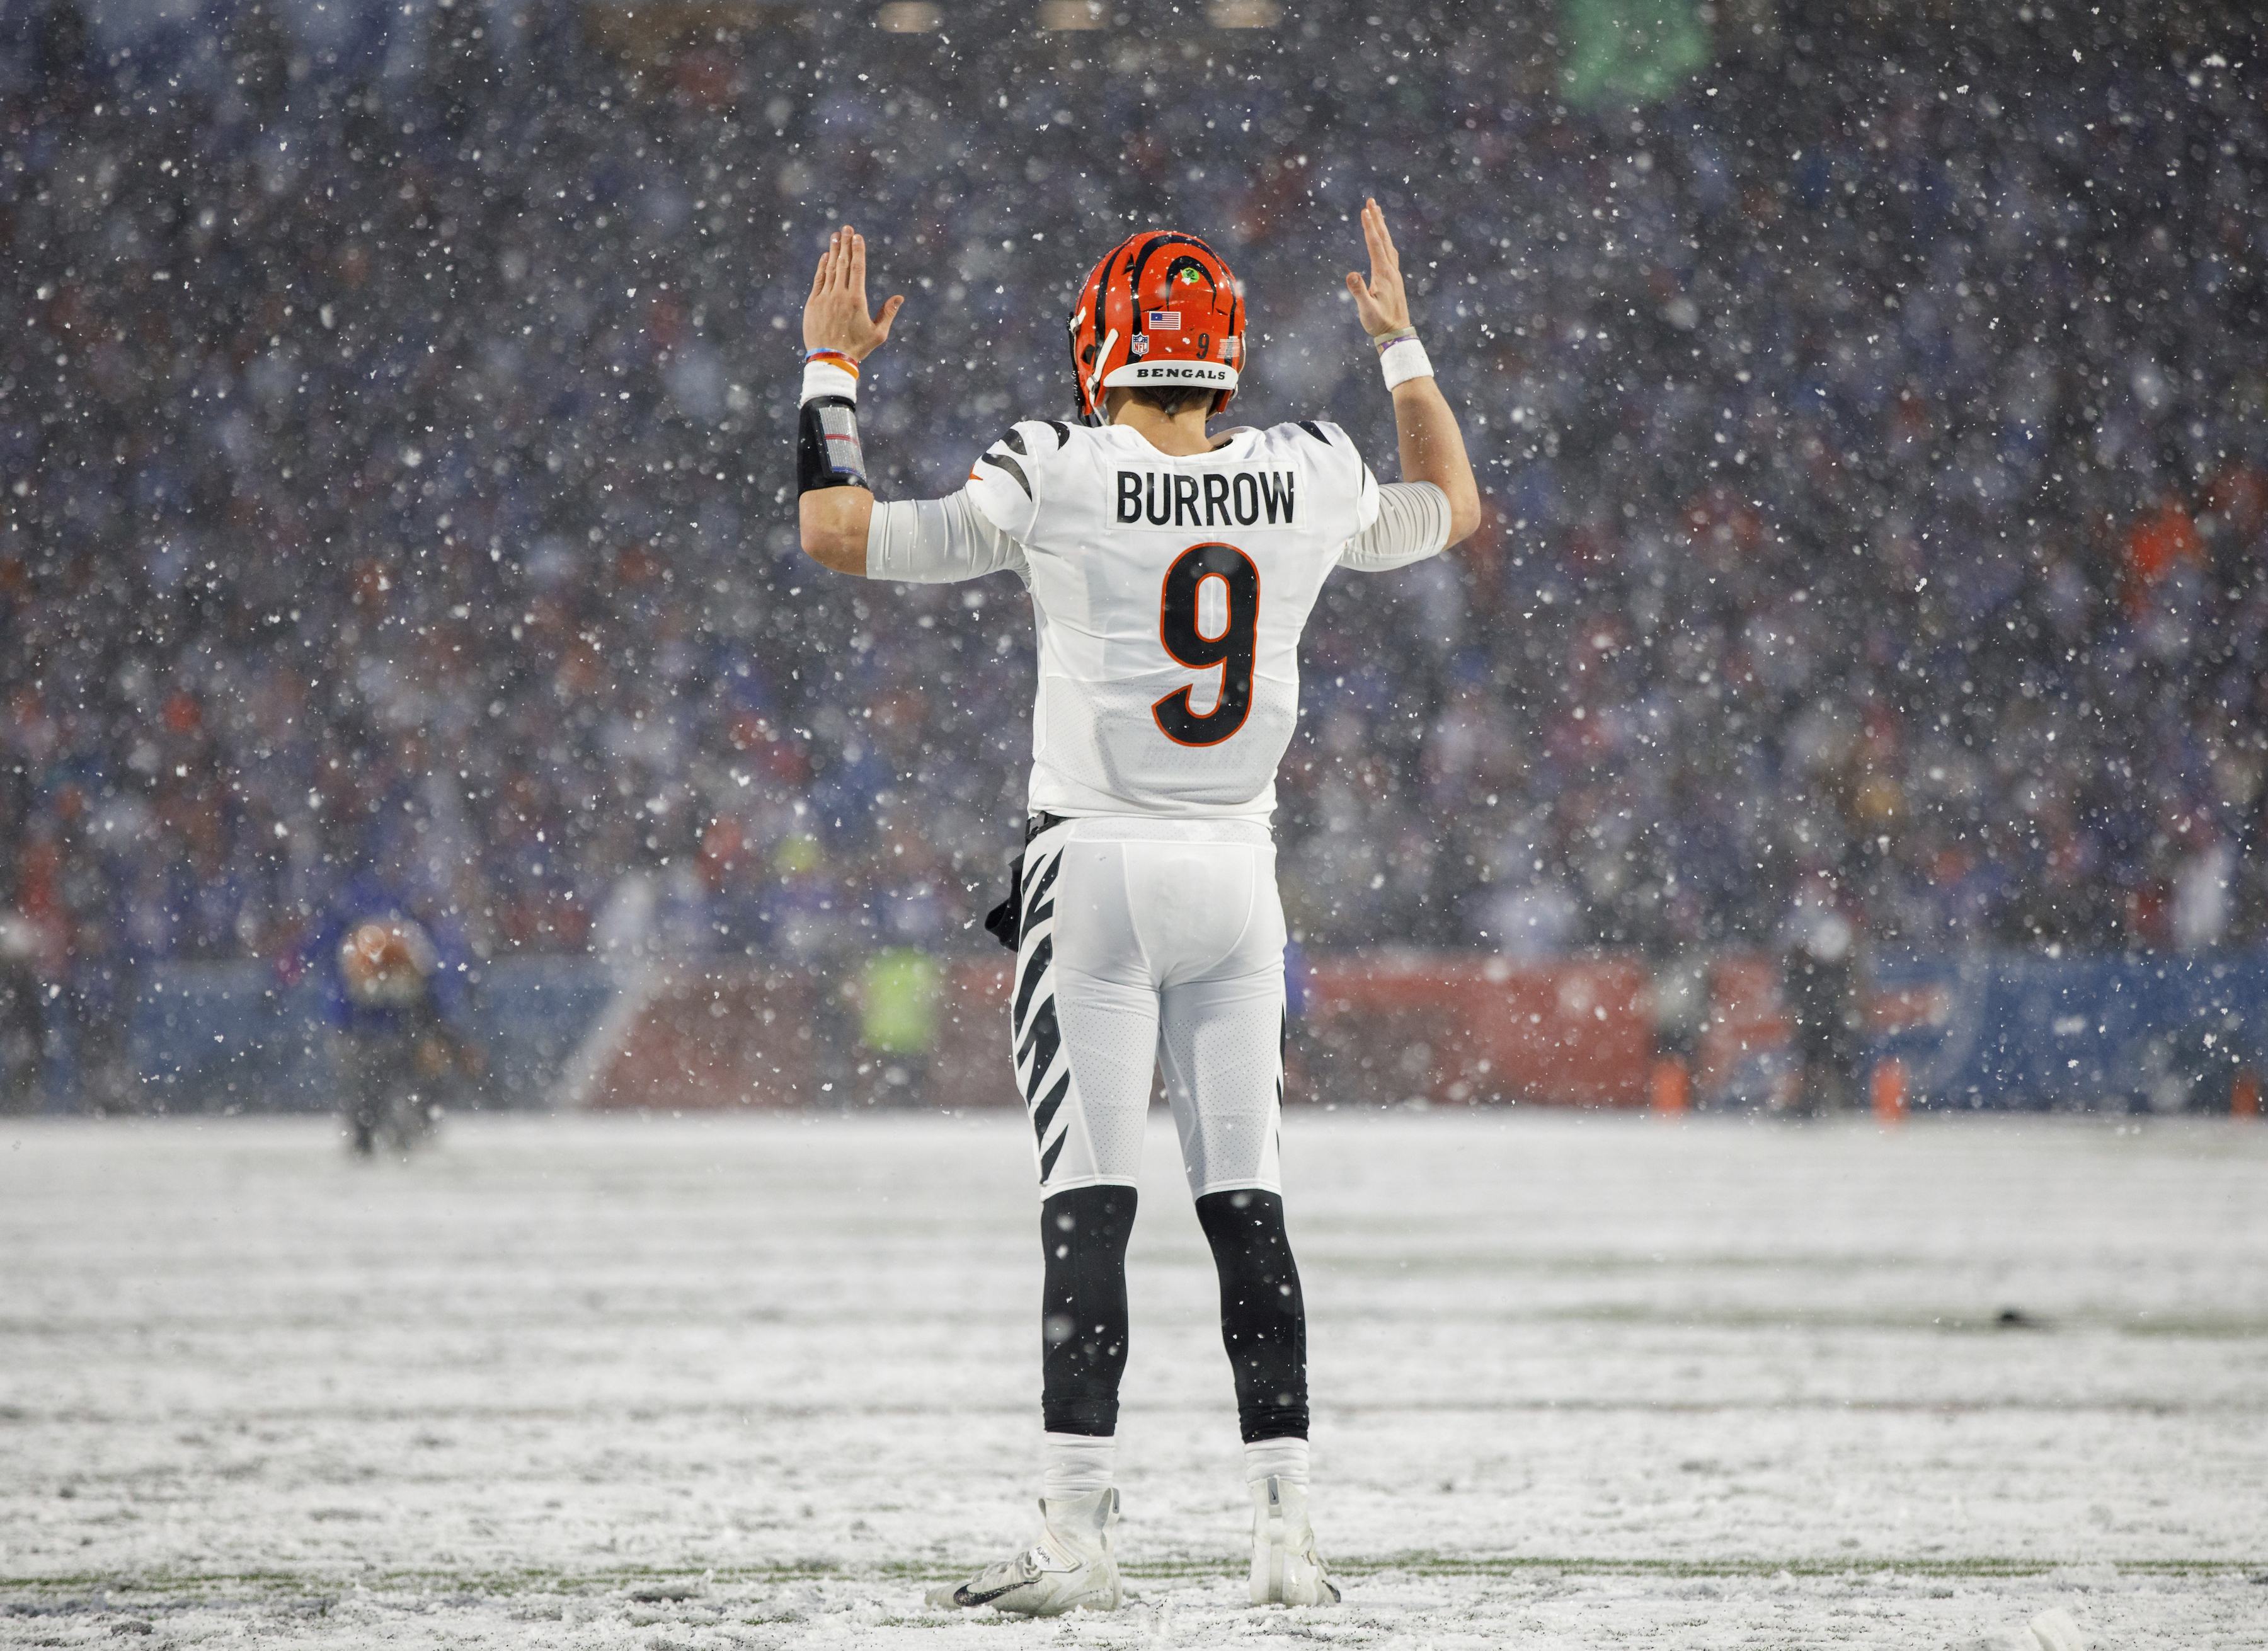 Bills vs. Bengals free live streams: How to watch 2023 NFL playoff